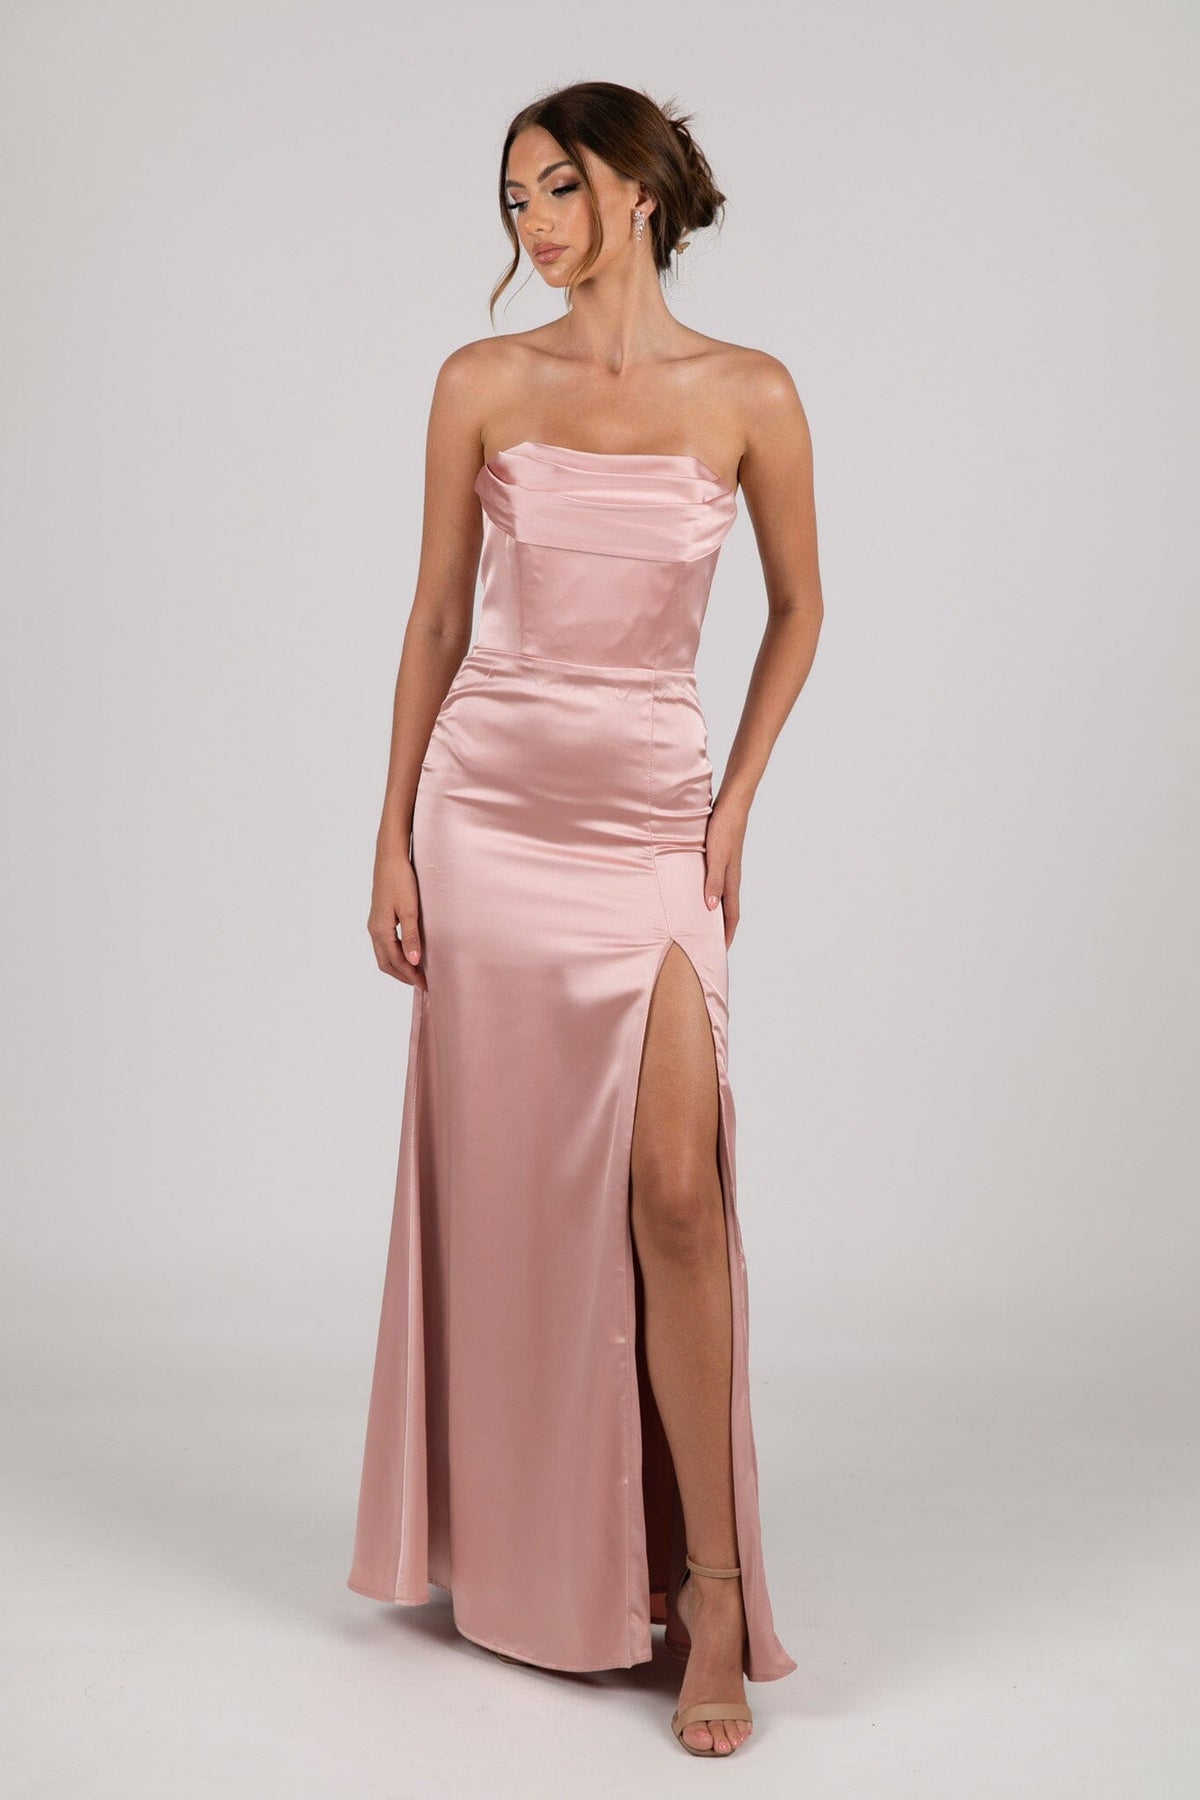 Dusty Pink Strapless Satin Maxi Dress with Draped Bust Detail and Side Slit